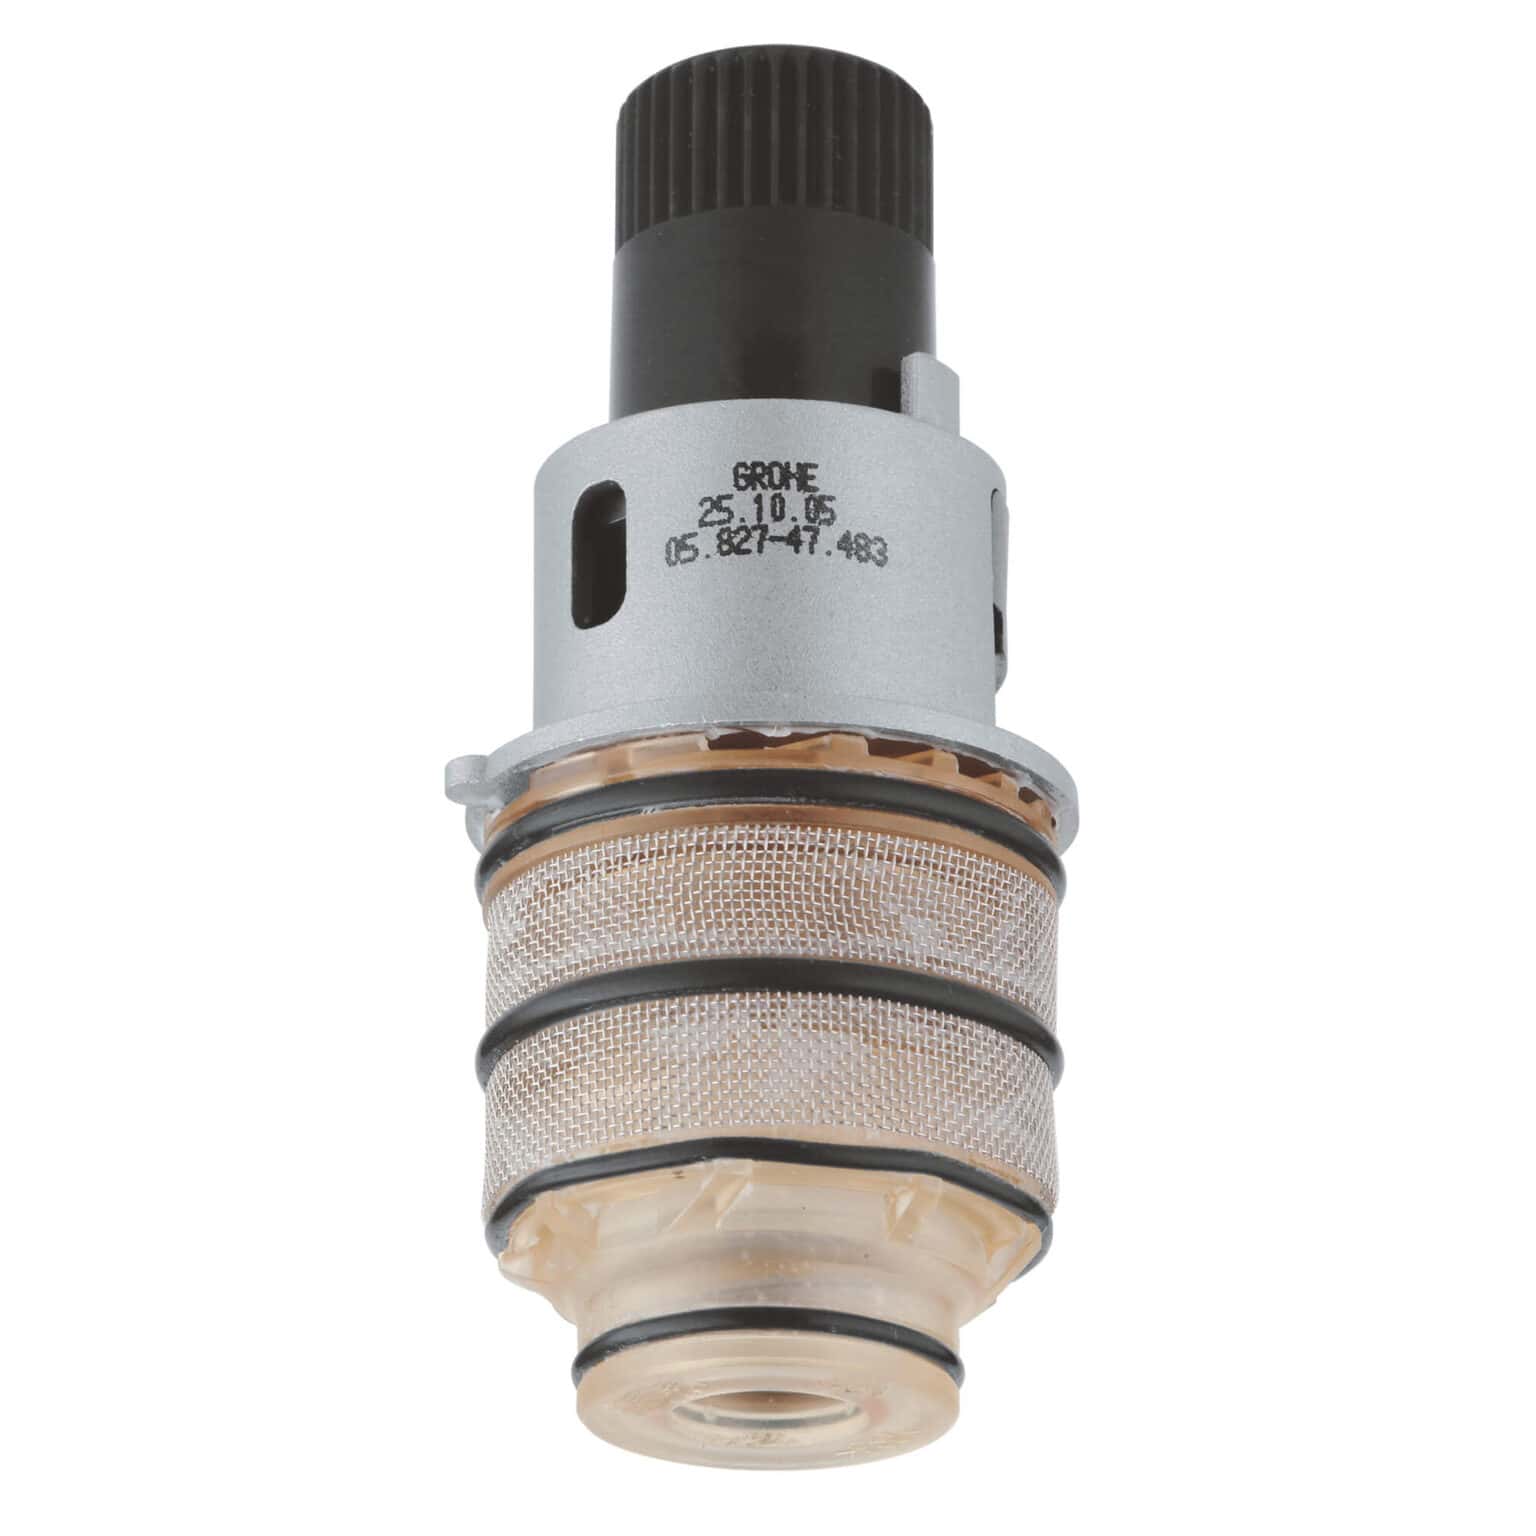 17114 47186000 thermostatic compact cartridge 34 inch for changed waterways original Taps Depot Ltd.